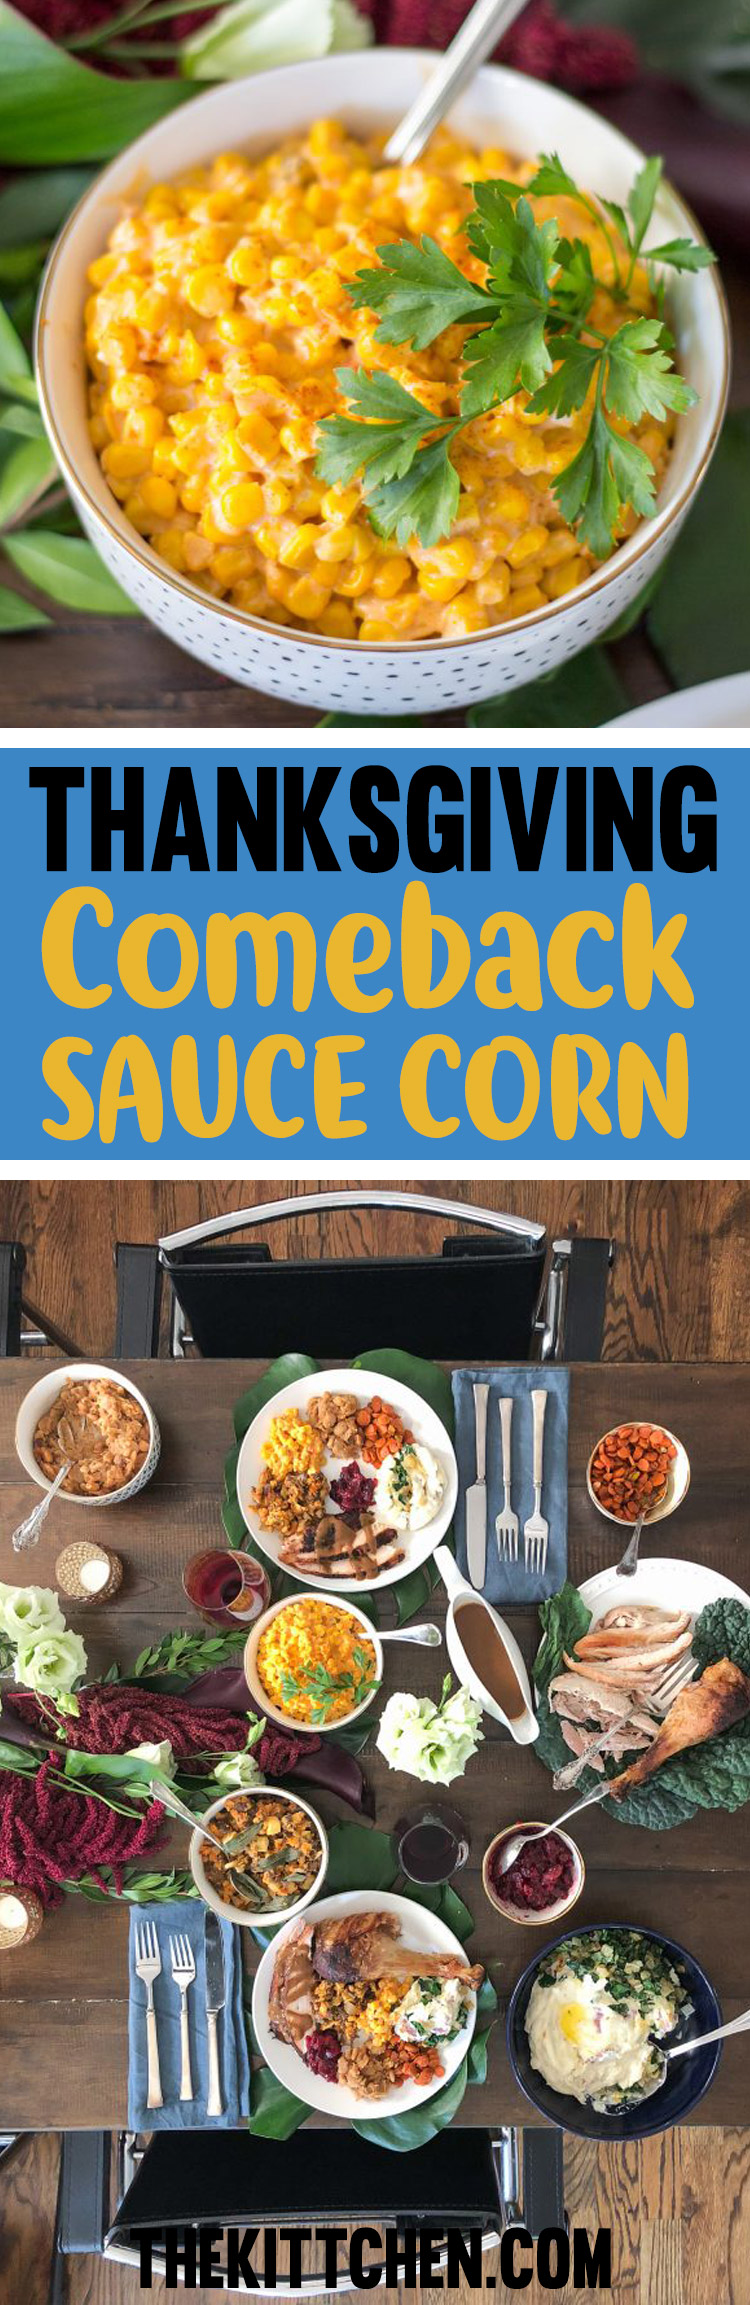 This easy 20 minute recipe for corn in a Mississippi comeback sauce is so good that my friends ate every bite.